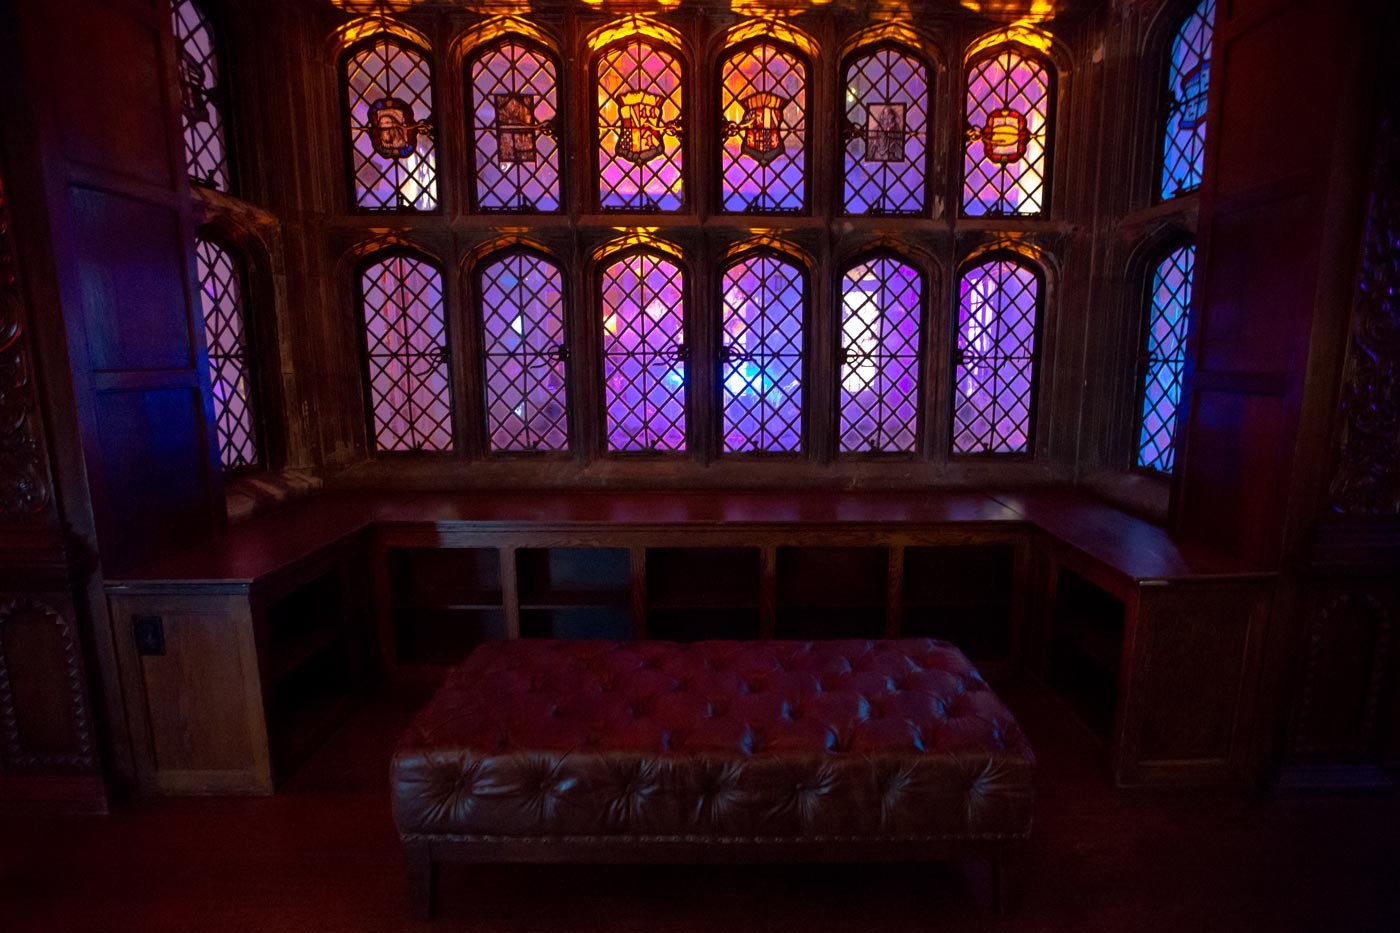 Stain glass effect on windows due to interior courtyard lighting